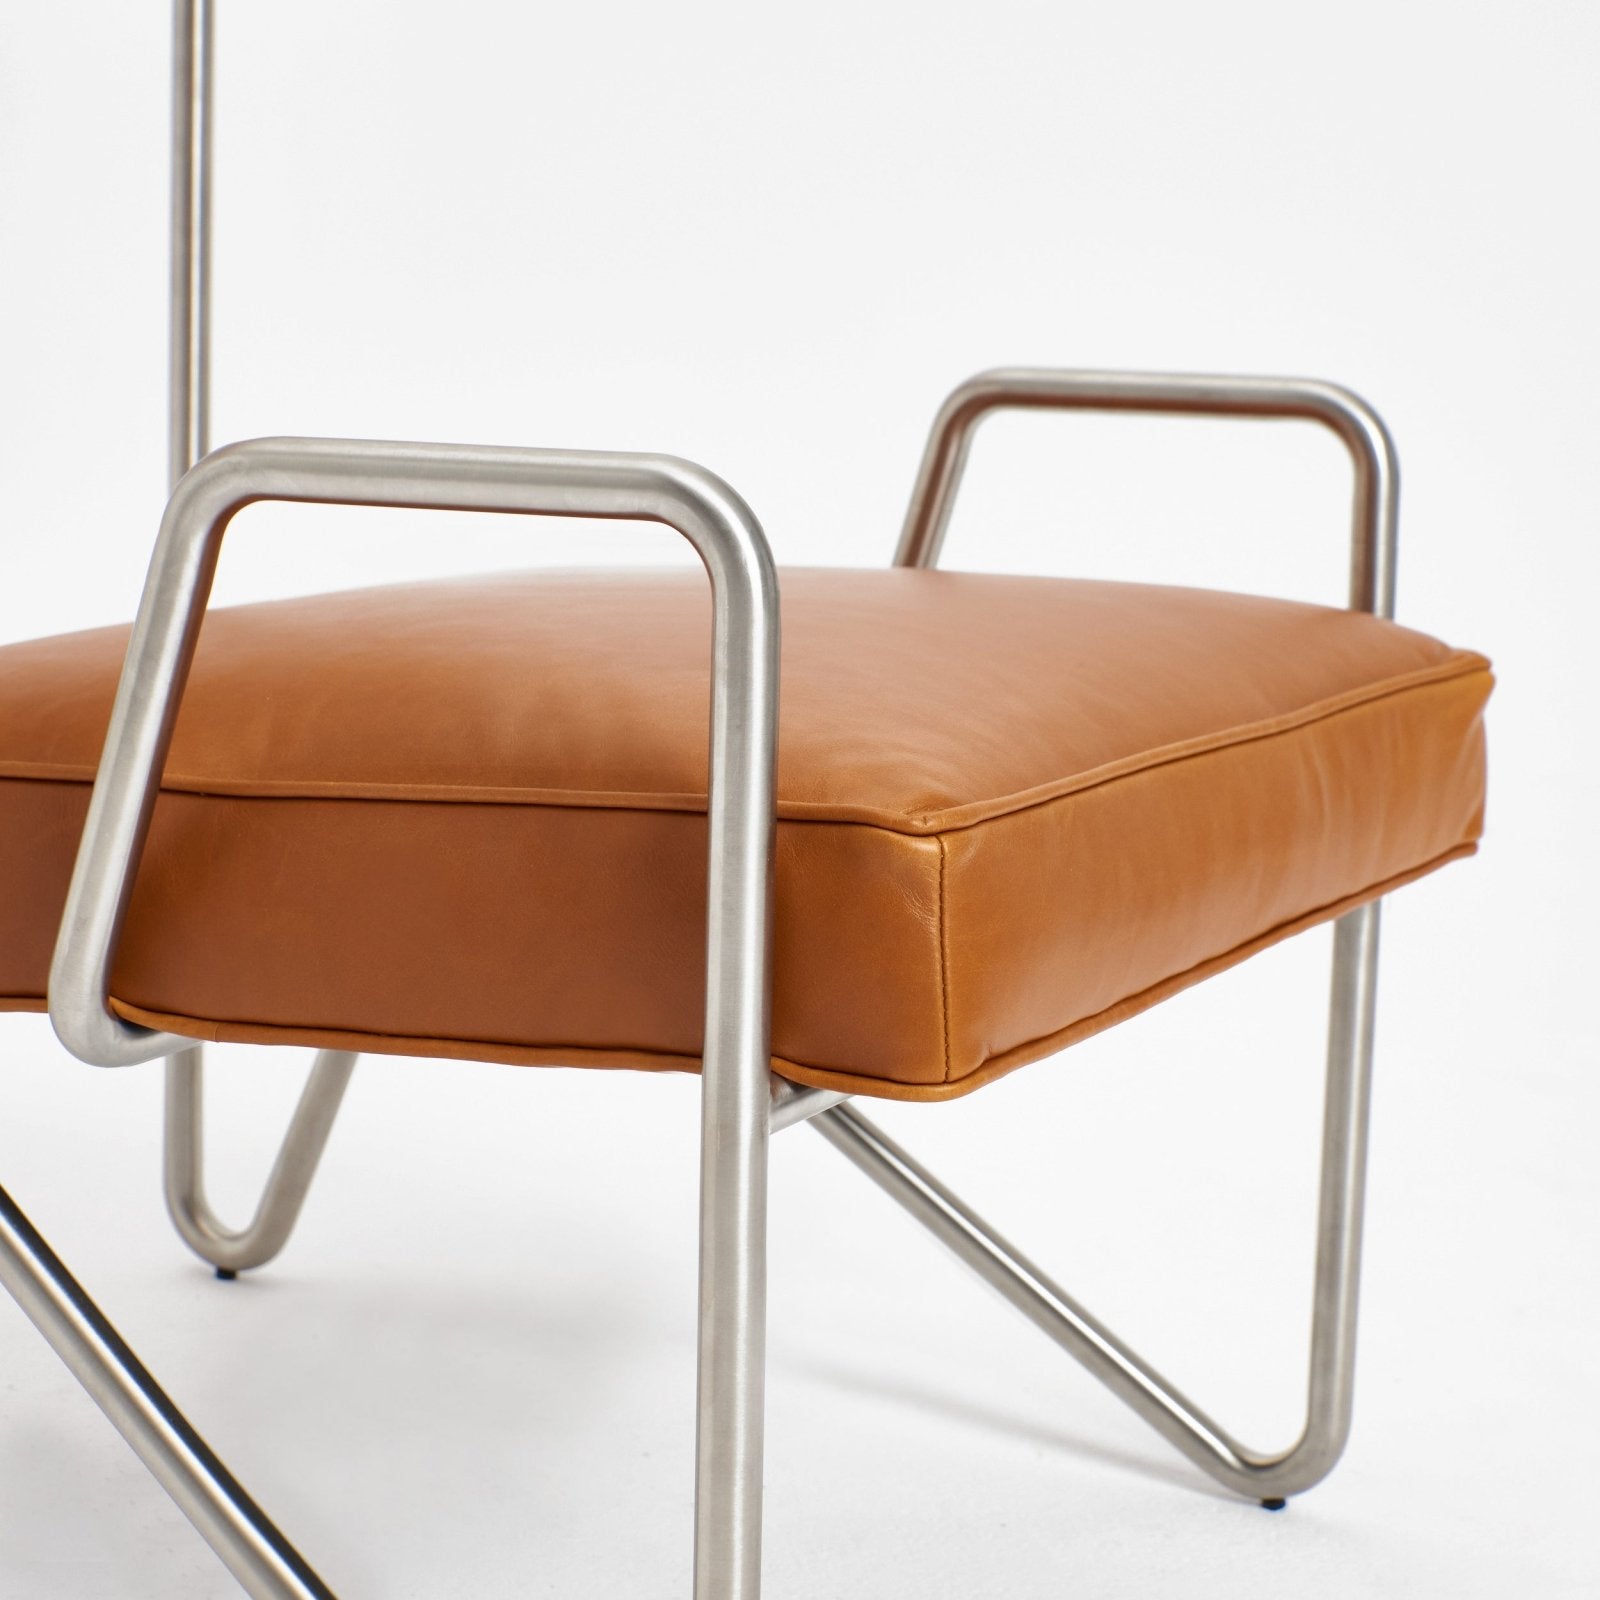 Larry's Lounge Sessel - Braun/Chrom Seating von Project 213A